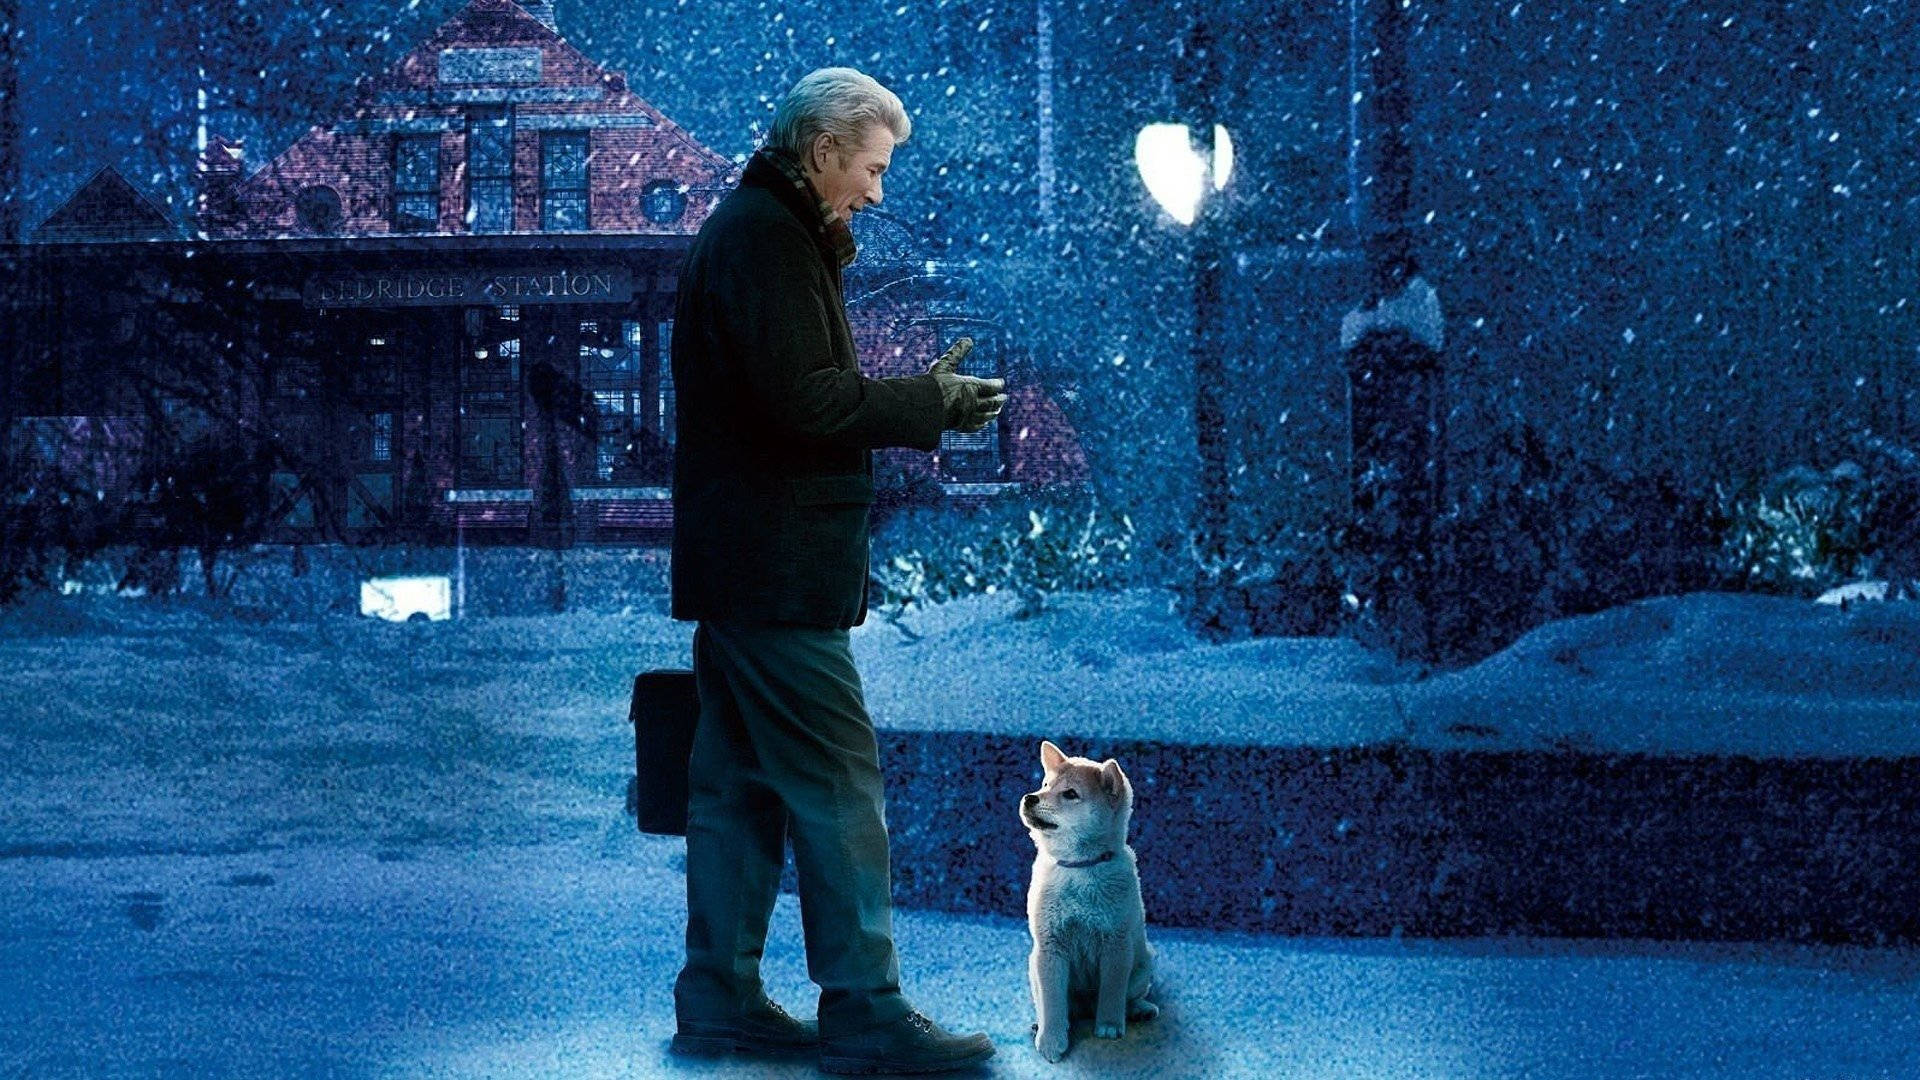 Richard Gere In The Snow Wallpaper